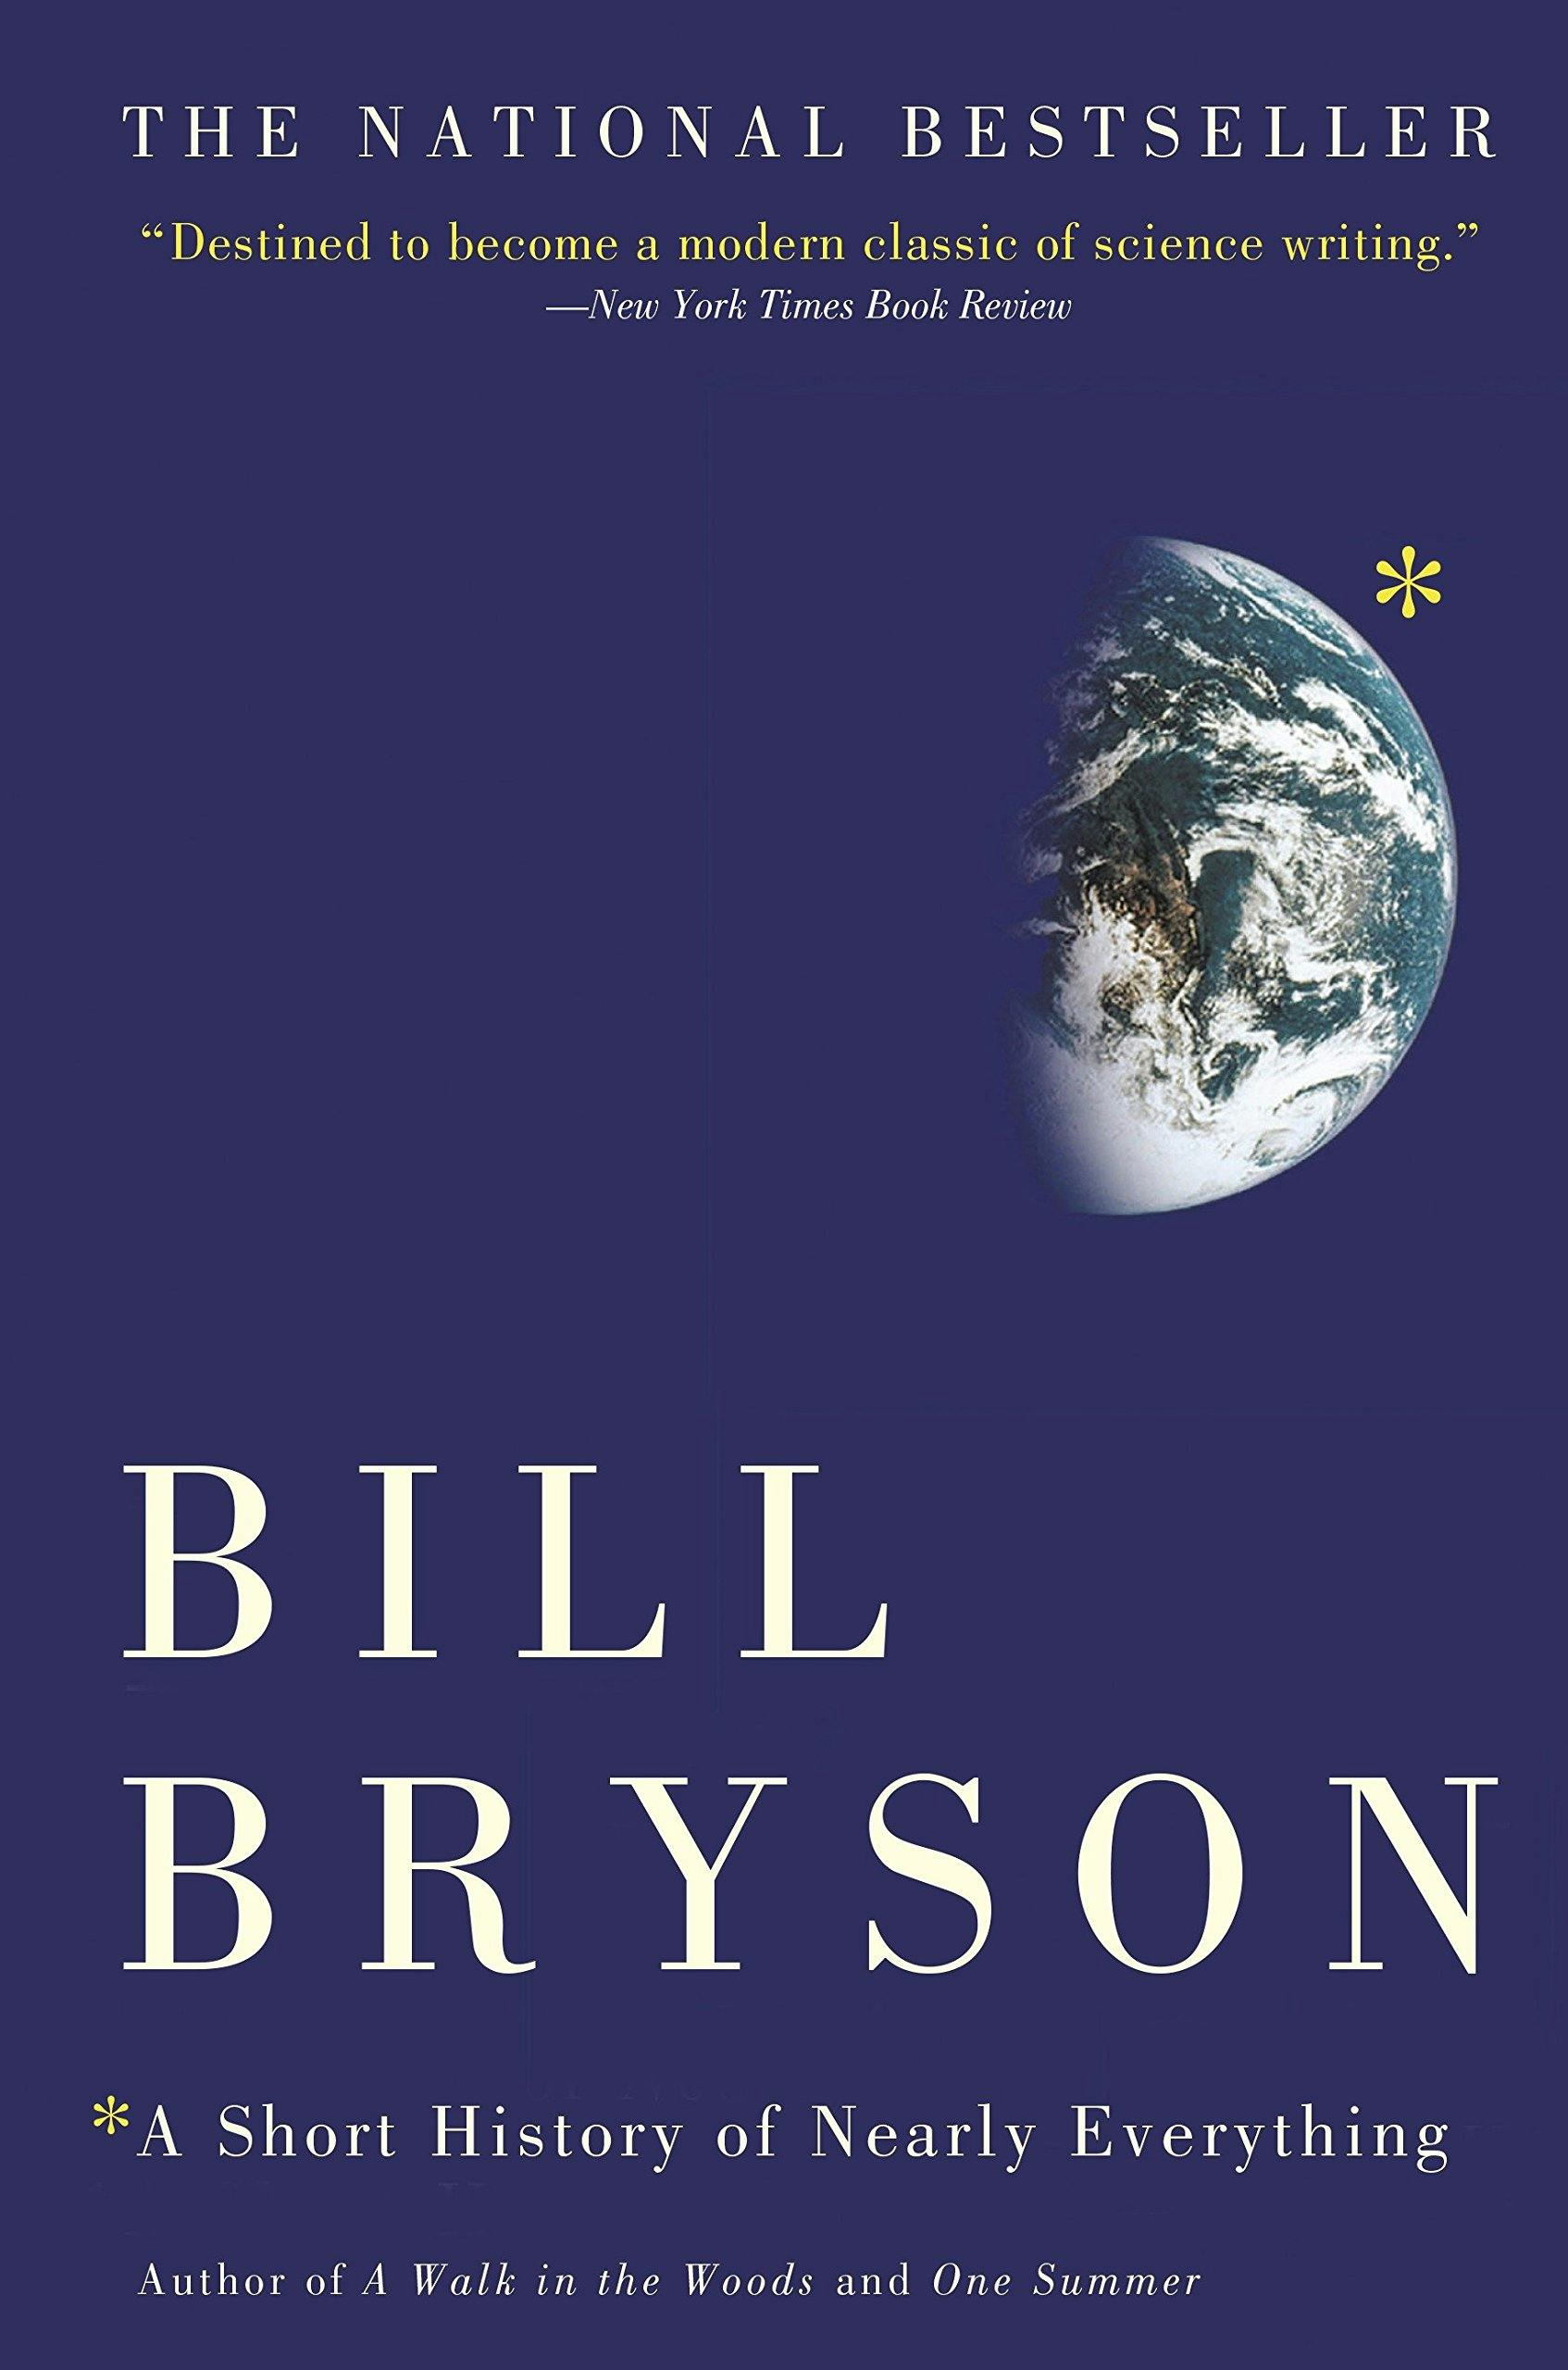 The media cover for “A Short History of Nearly Everything” by Bill Bryson